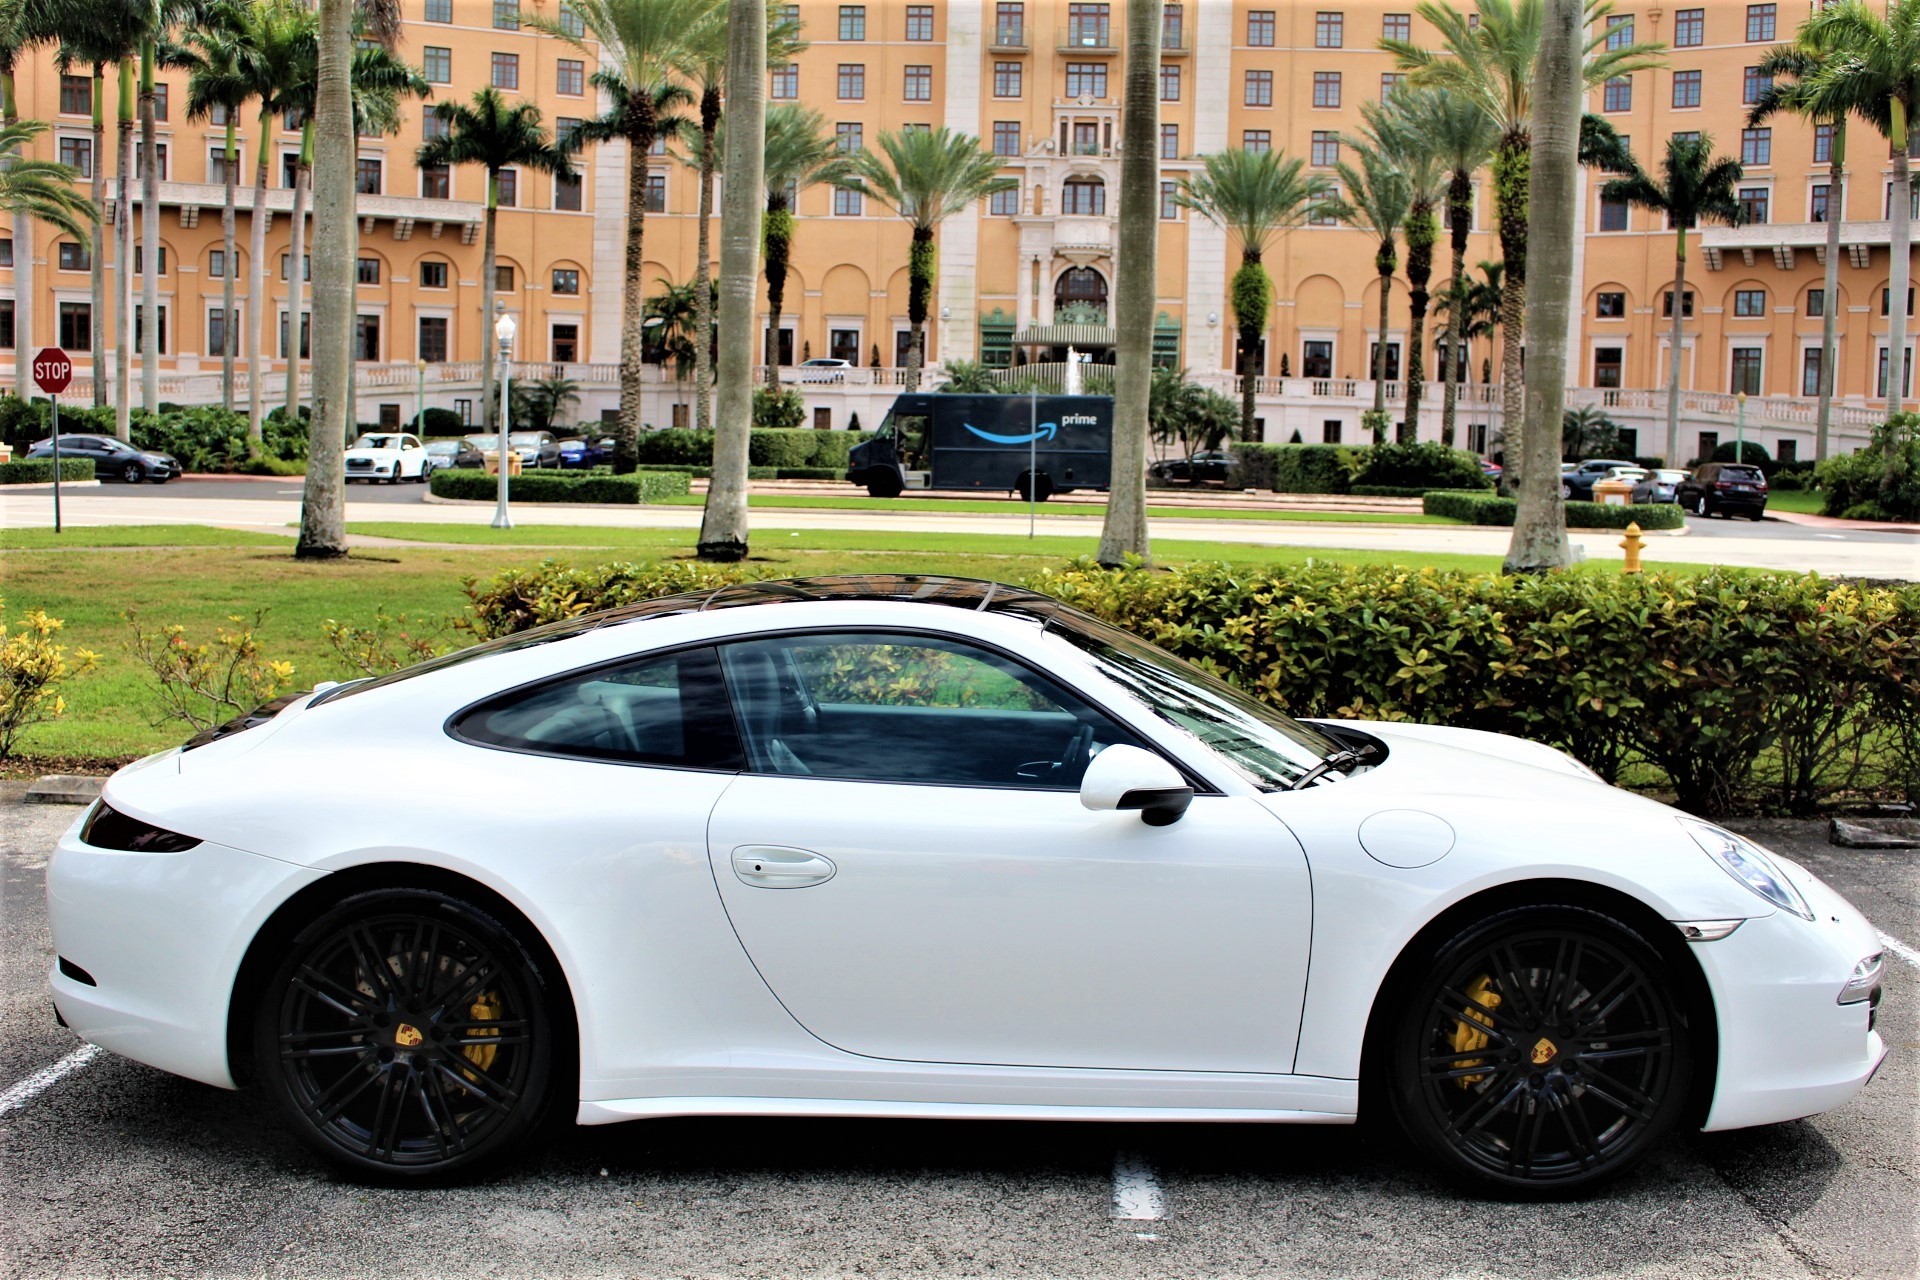 Used 2013 Porsche 911 Carrera 4 for sale Sold at The Gables Sports Cars in Miami FL 33146 2